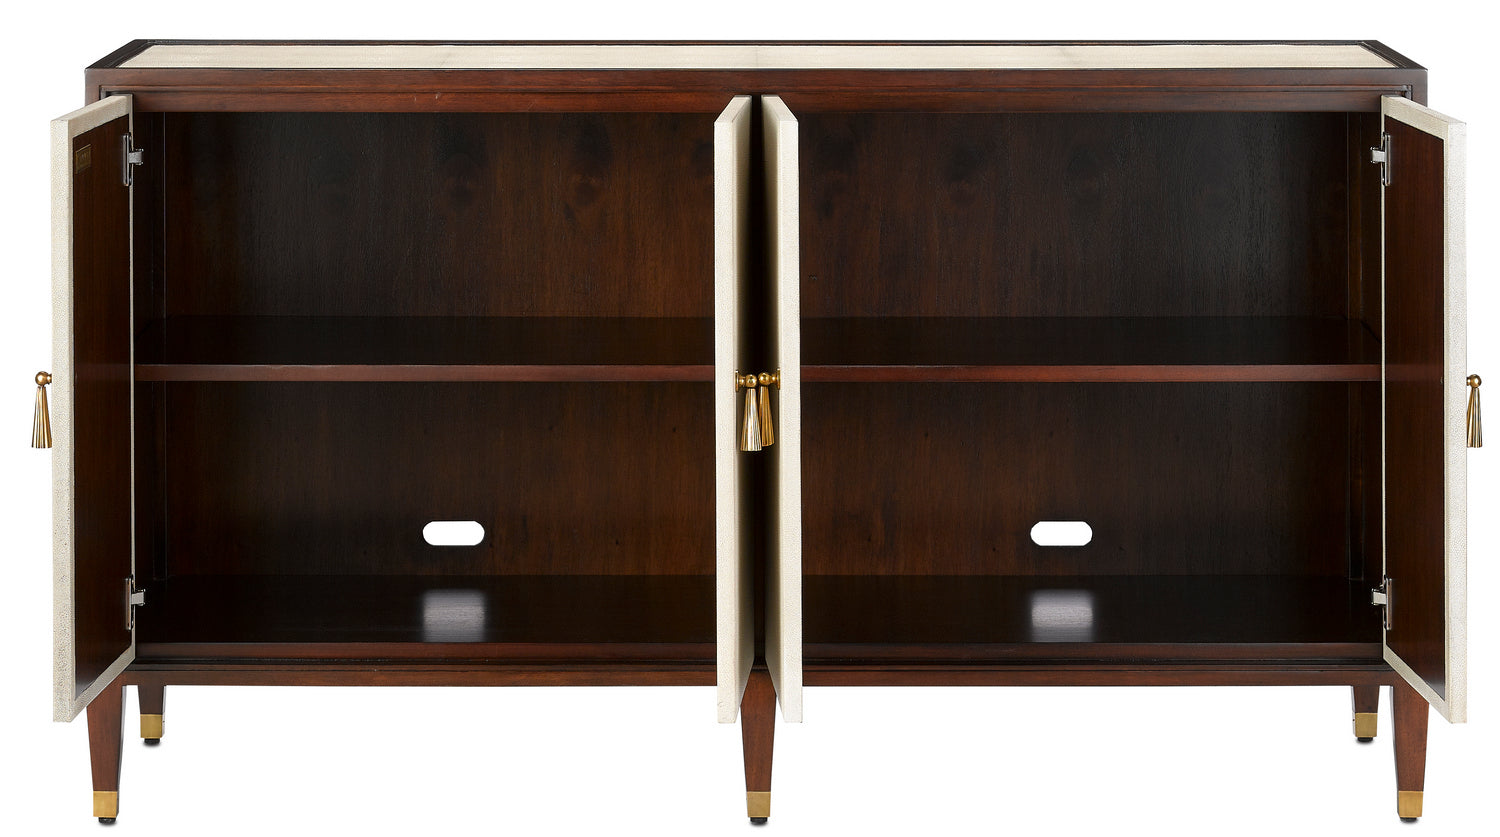 Credenza from the Evie collection in Ivory/Dark Walnut/Brass finish